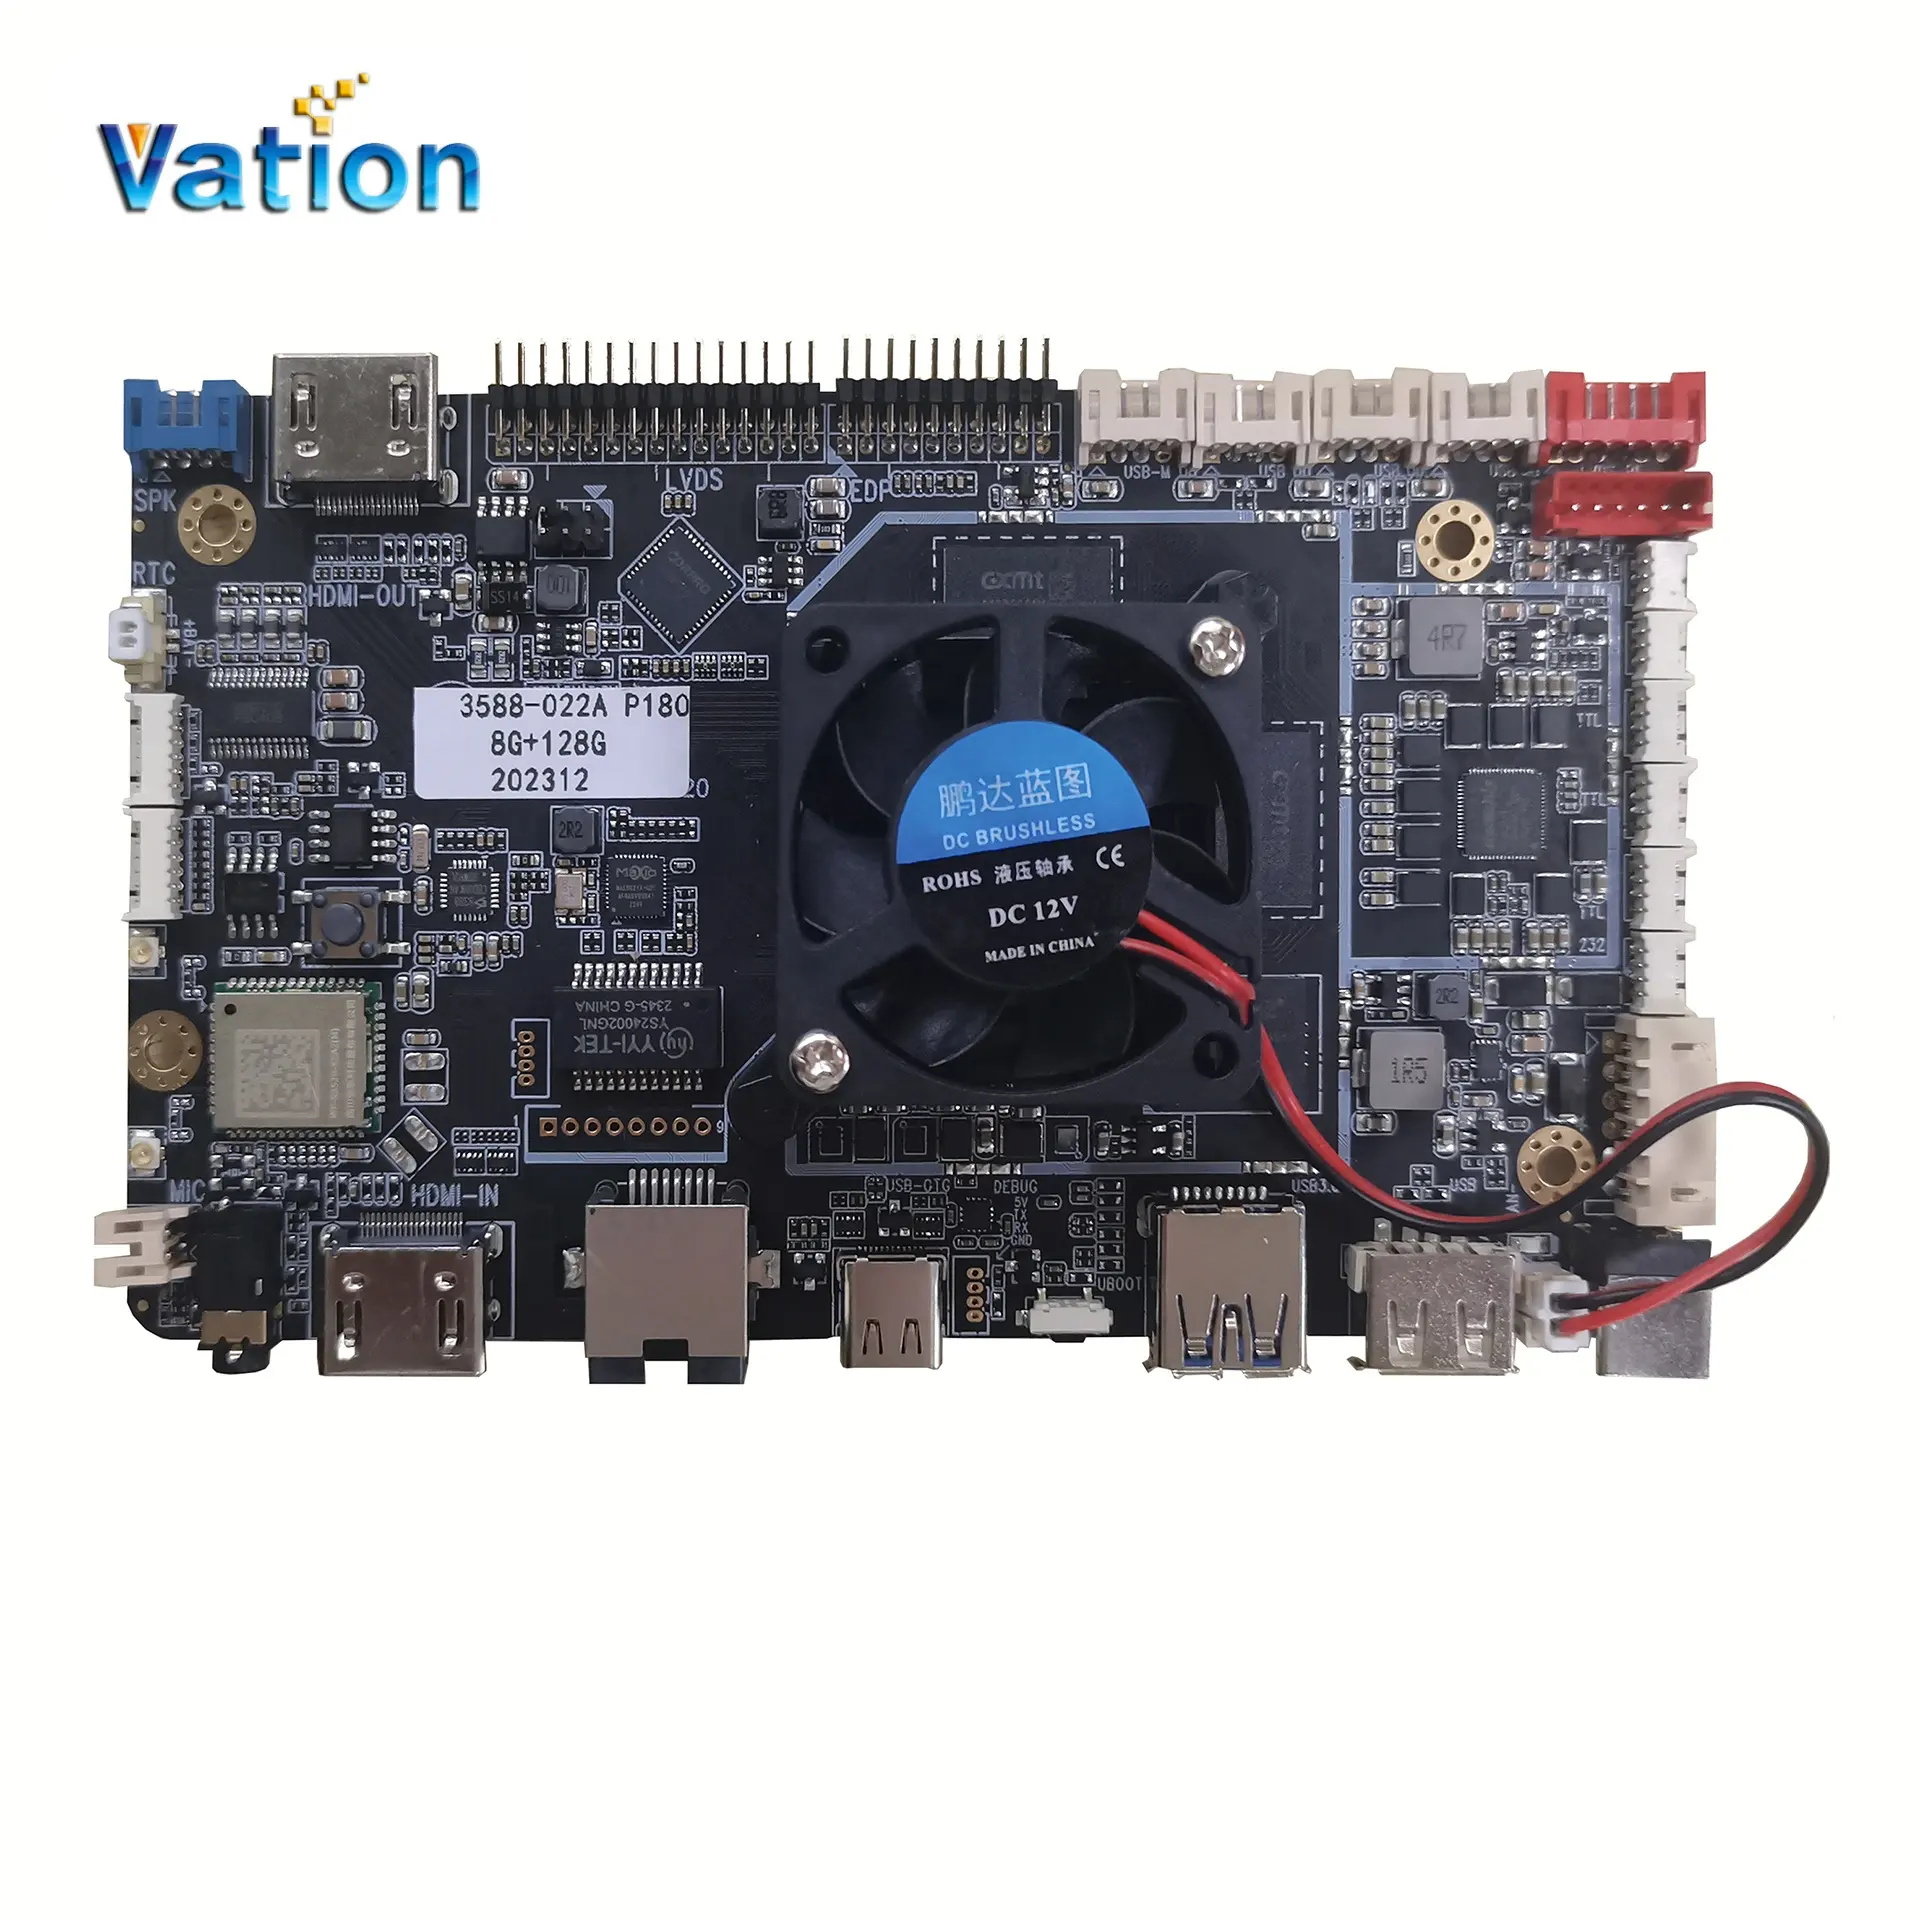 RK3588 022A Digital signage V by one 4K LCD panel 4G module Mini PCEL Android 11 Debian Linux development motherboard